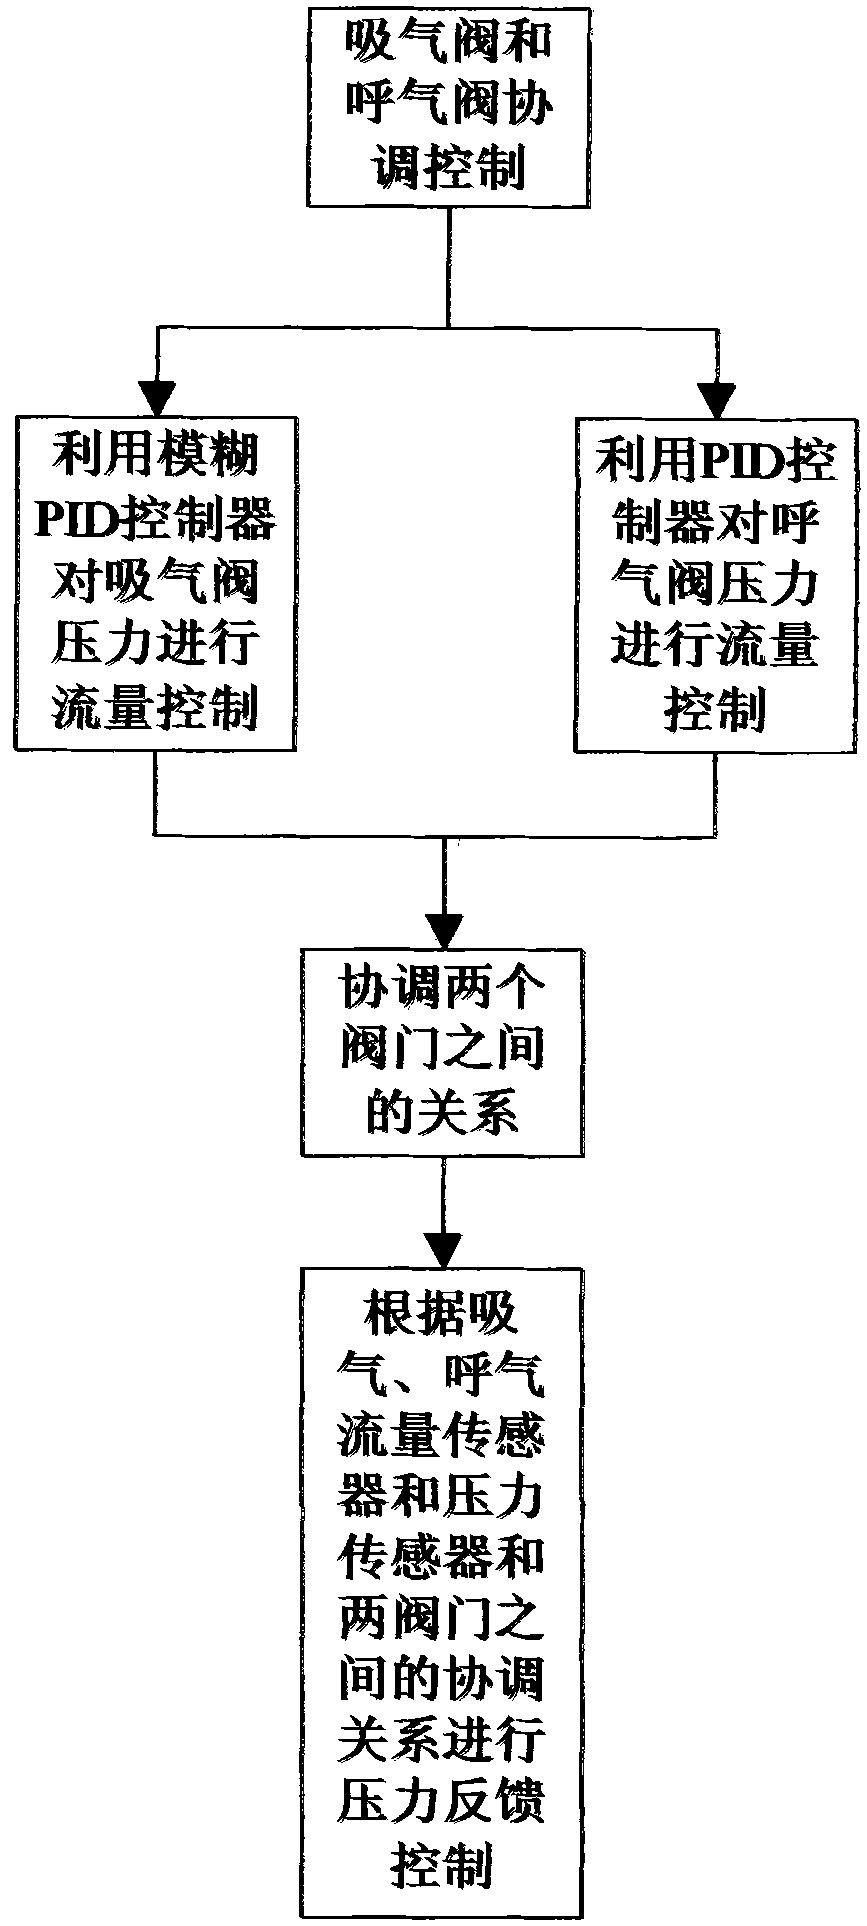 Method for controlling pressure of anesthesia machine and breathing machine pressure control by using expiration flow sensor